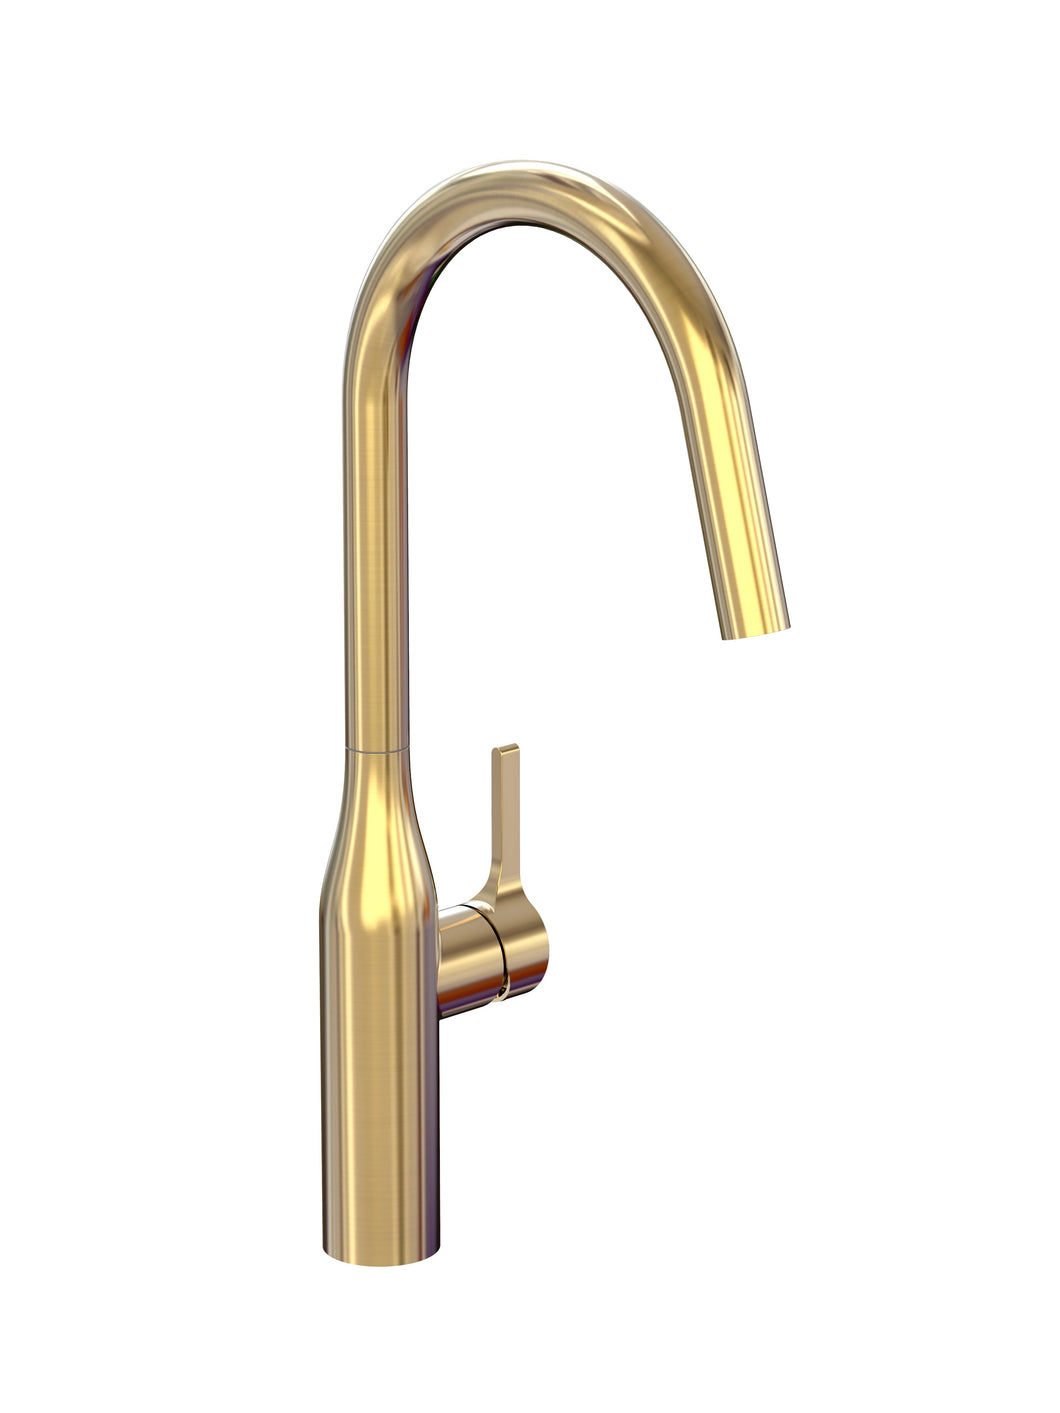 TREDEX Power Single Lever High-spout Kitchen Sink Mixer Brushed Gold